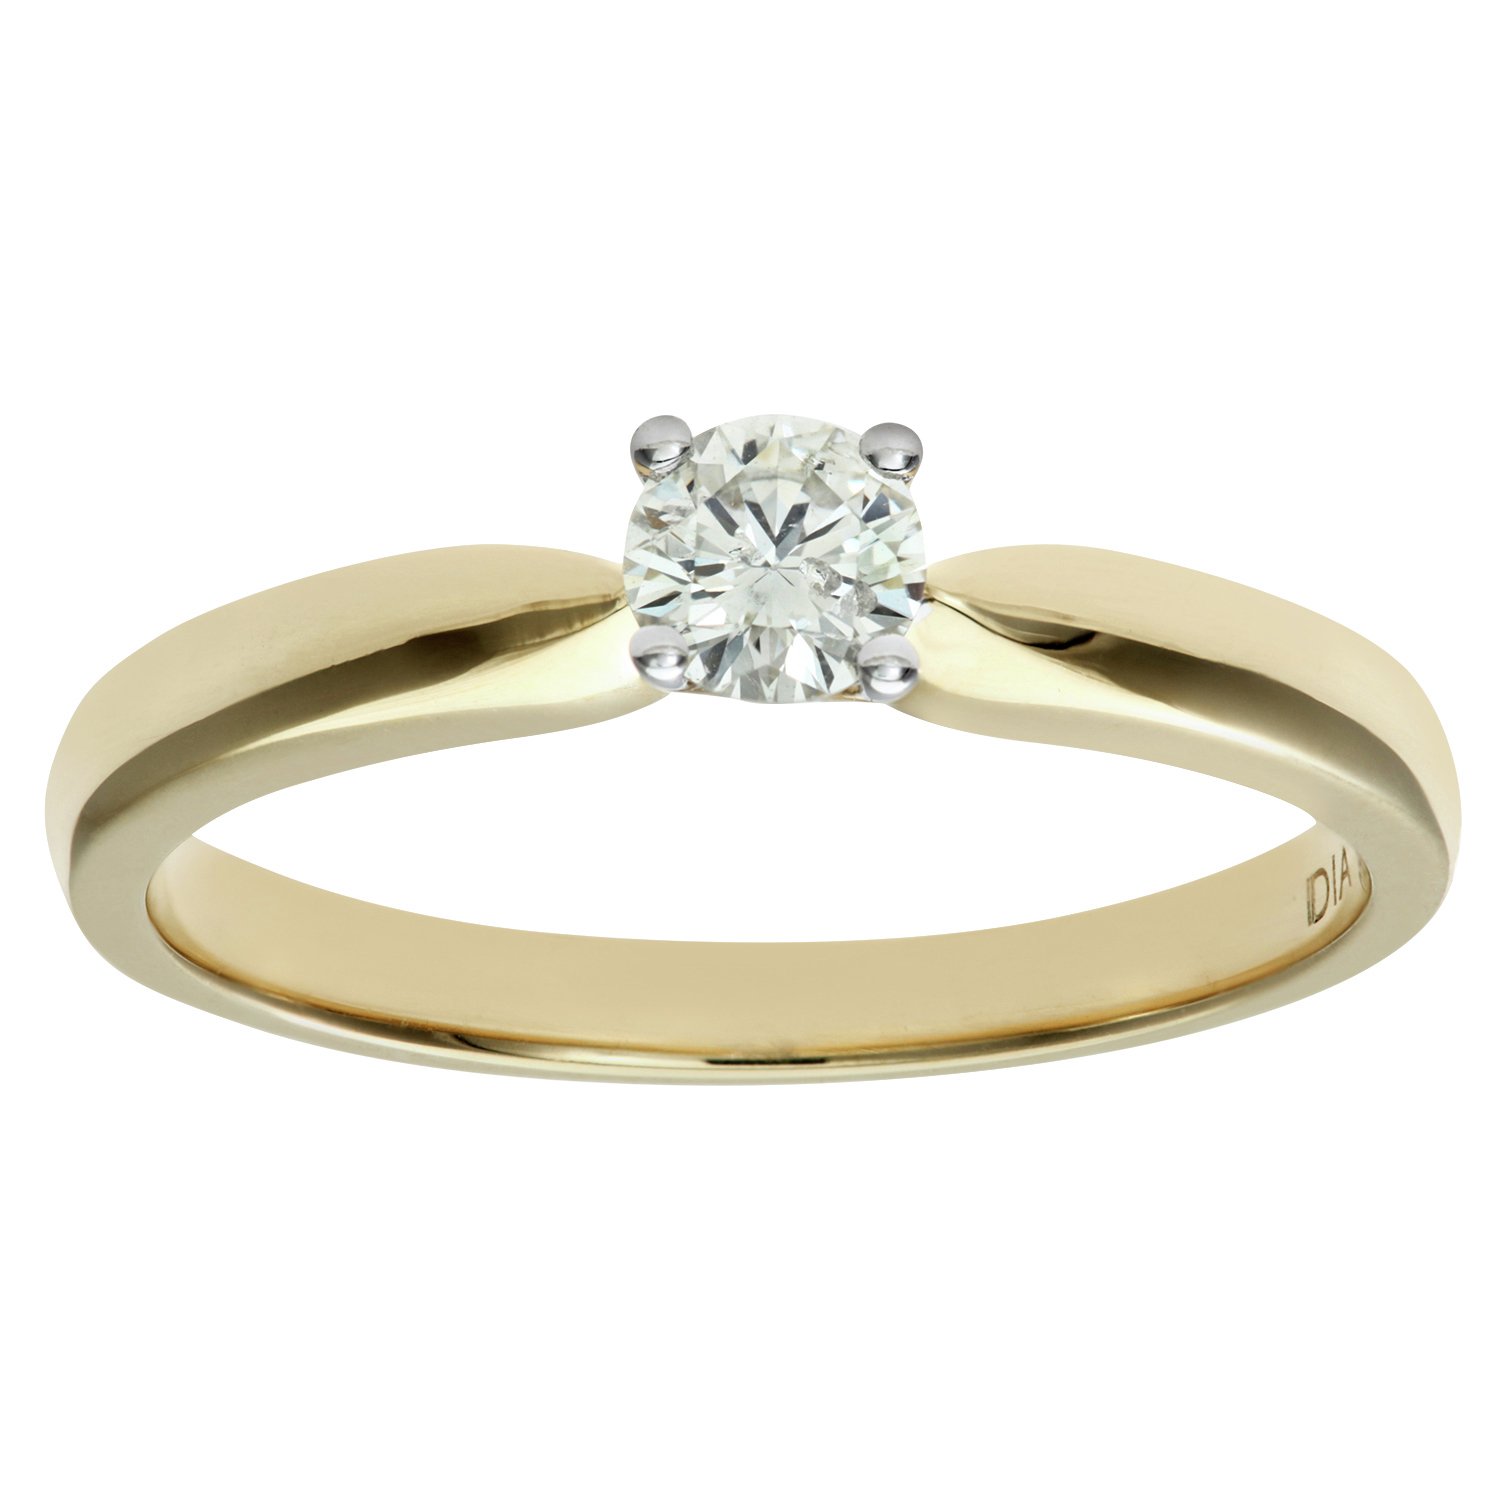 Everlasting Love 18ct Gold 0.25ct Solitaire Ring - Size P